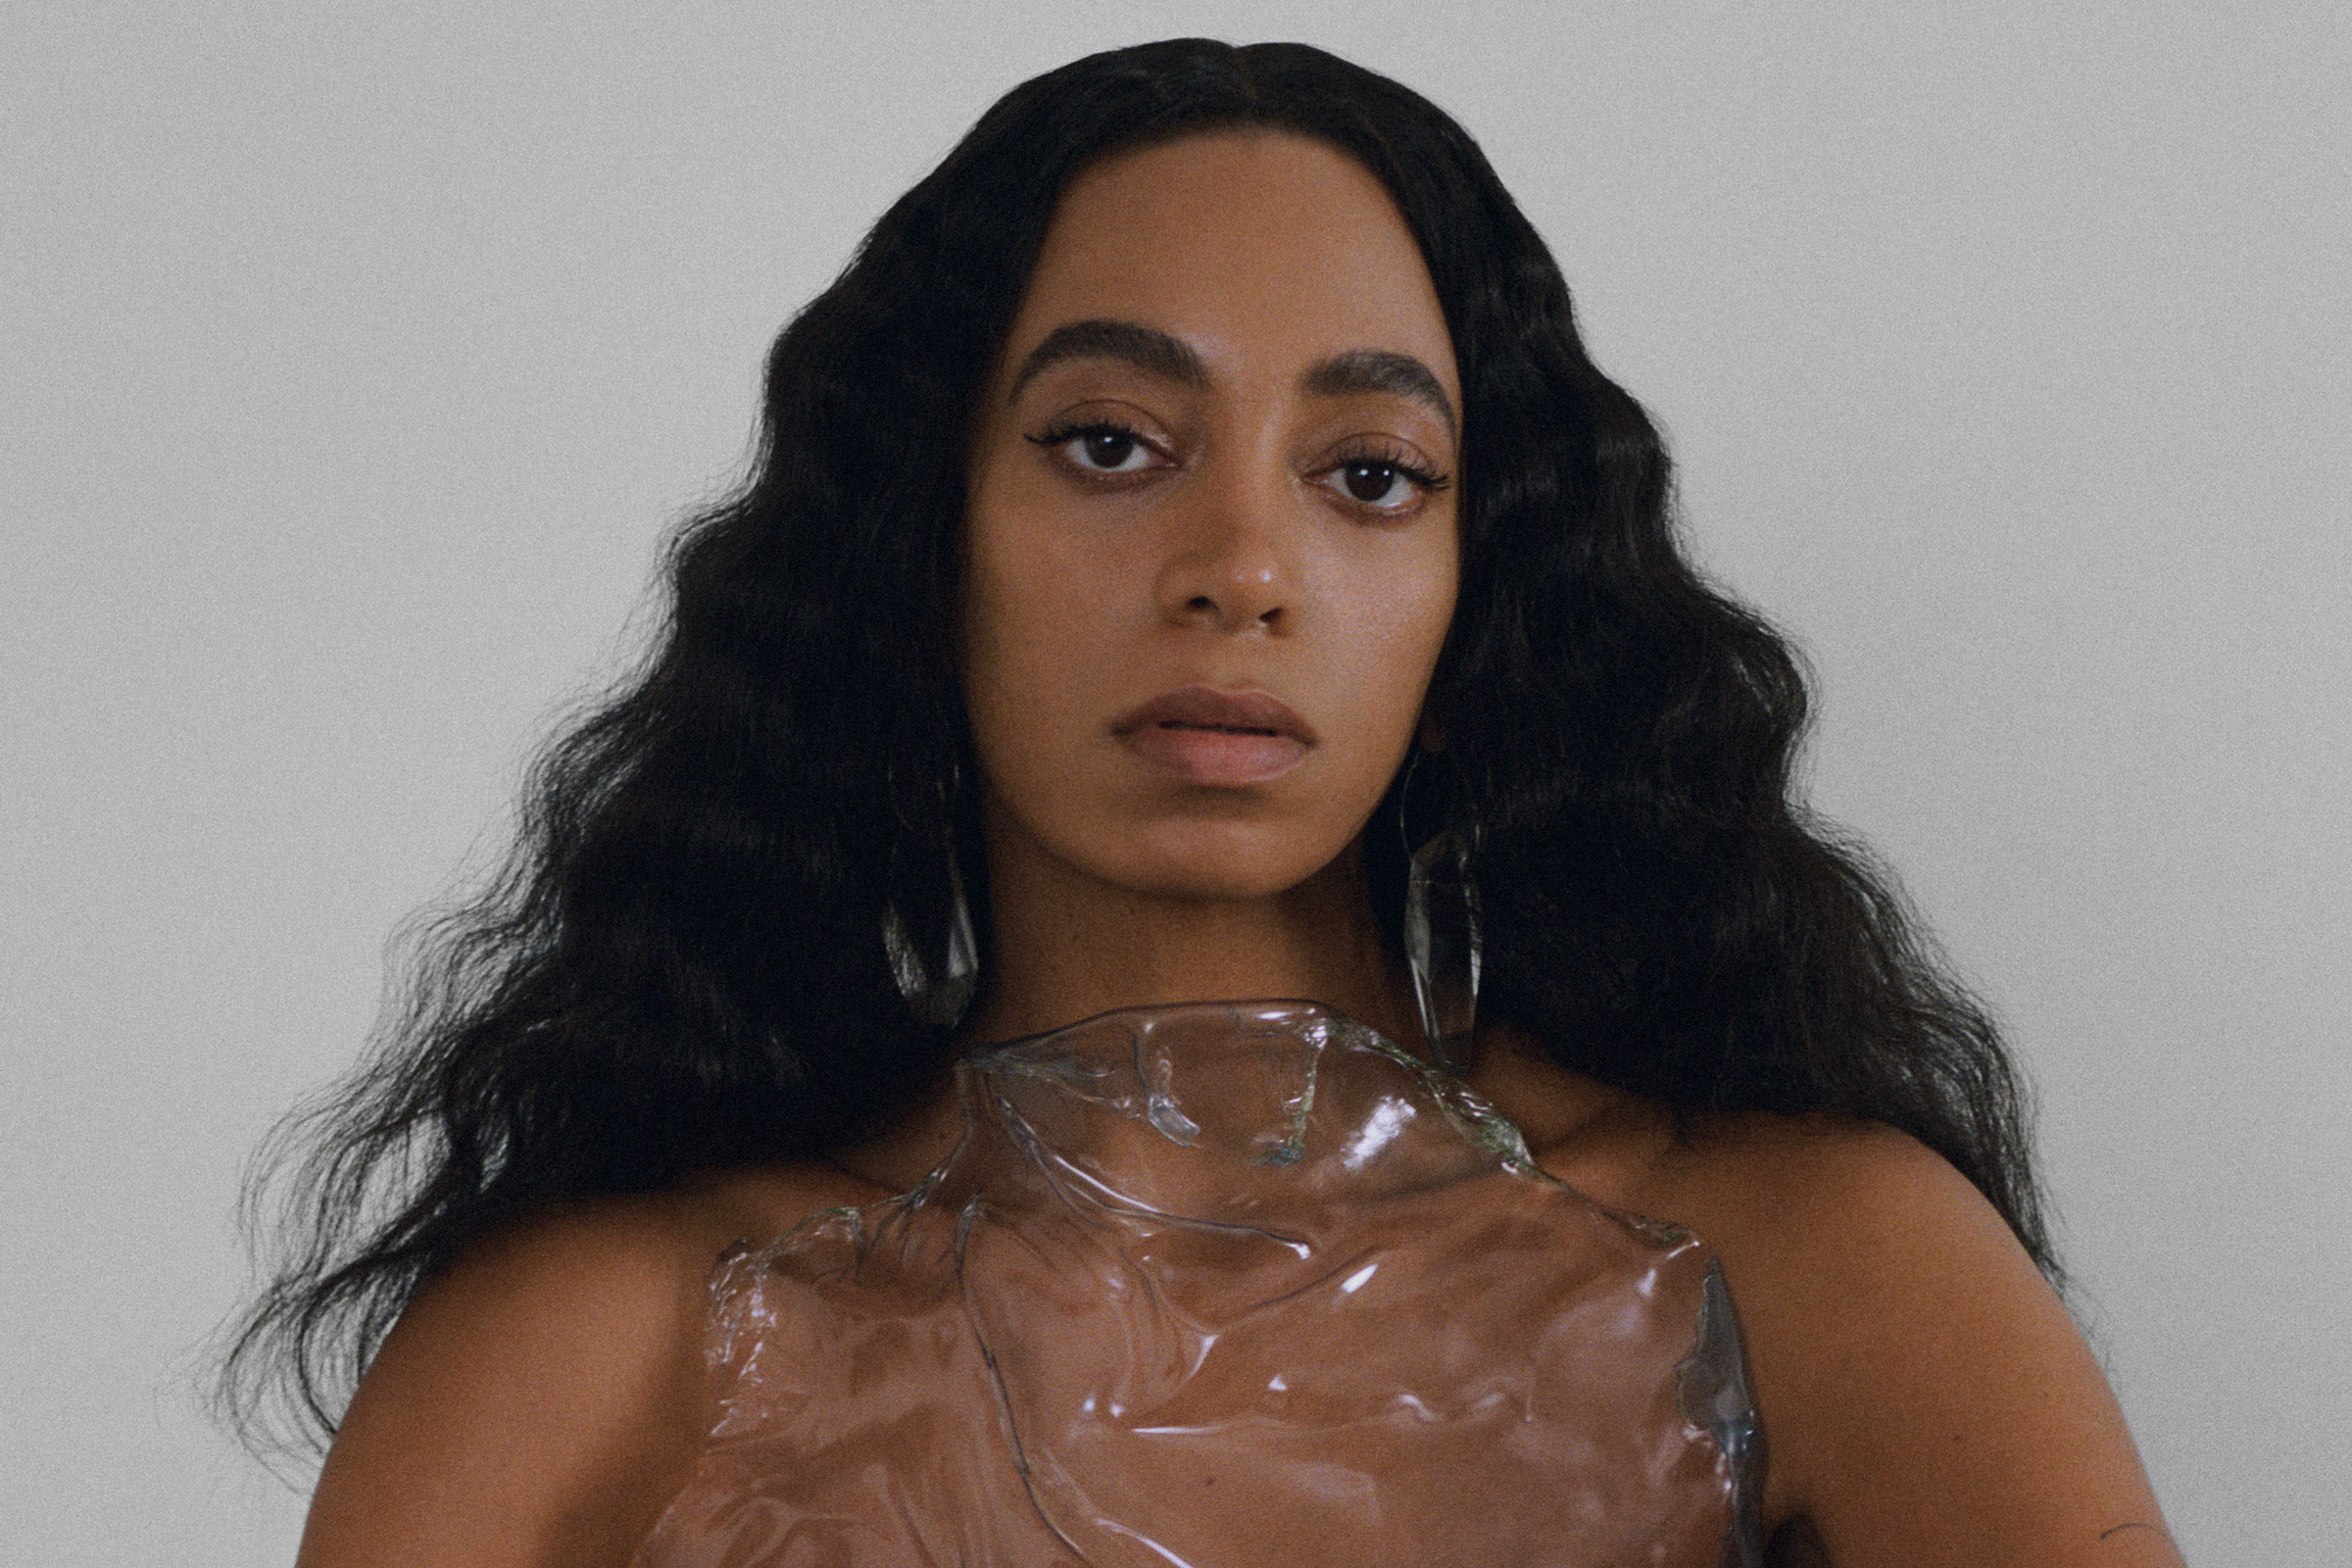 Solange Reveals She Was "fighting" For Her Life While Making "When I Get Home"